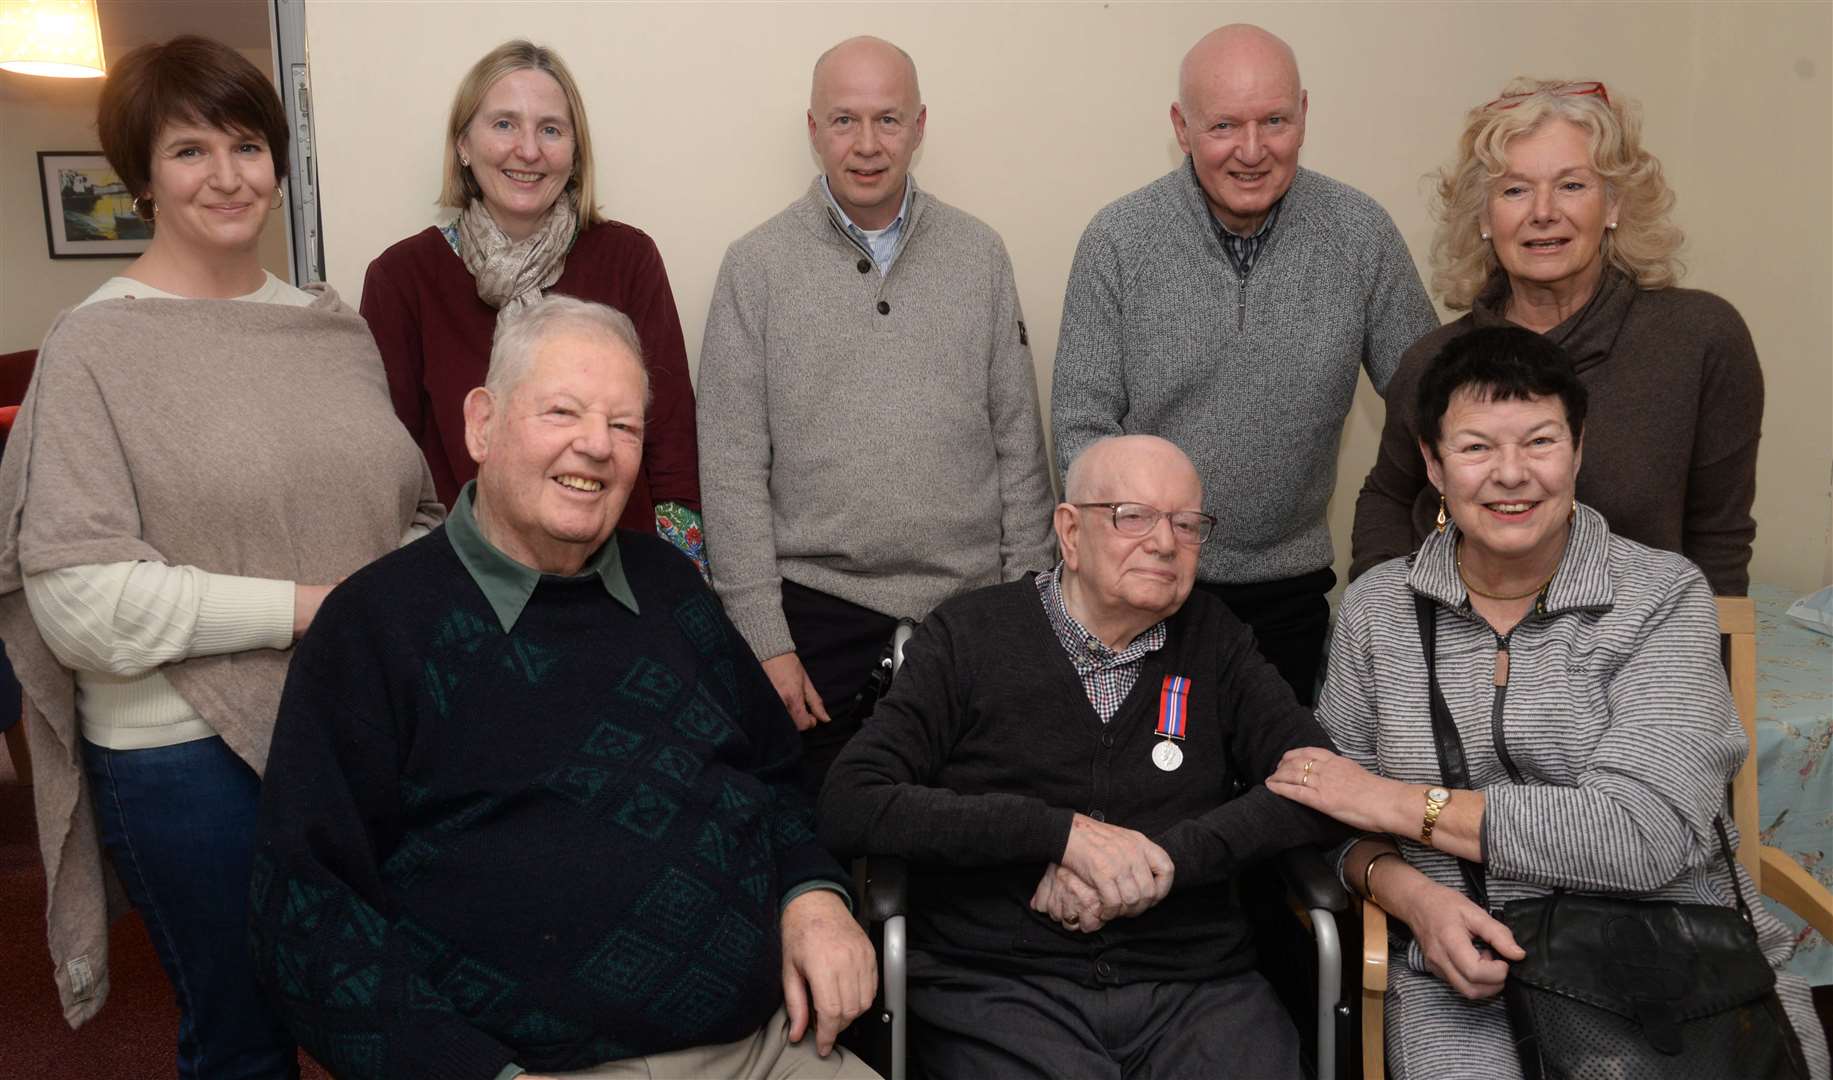 Albert Gear, wearing his much overdue medal, with brother Eric, granddaughter Alison Bright, daughter-in-law Nicola Gear, sons Geoff and Michael, daughter-in-law Lydia Gear and daughter Susan Stephenson